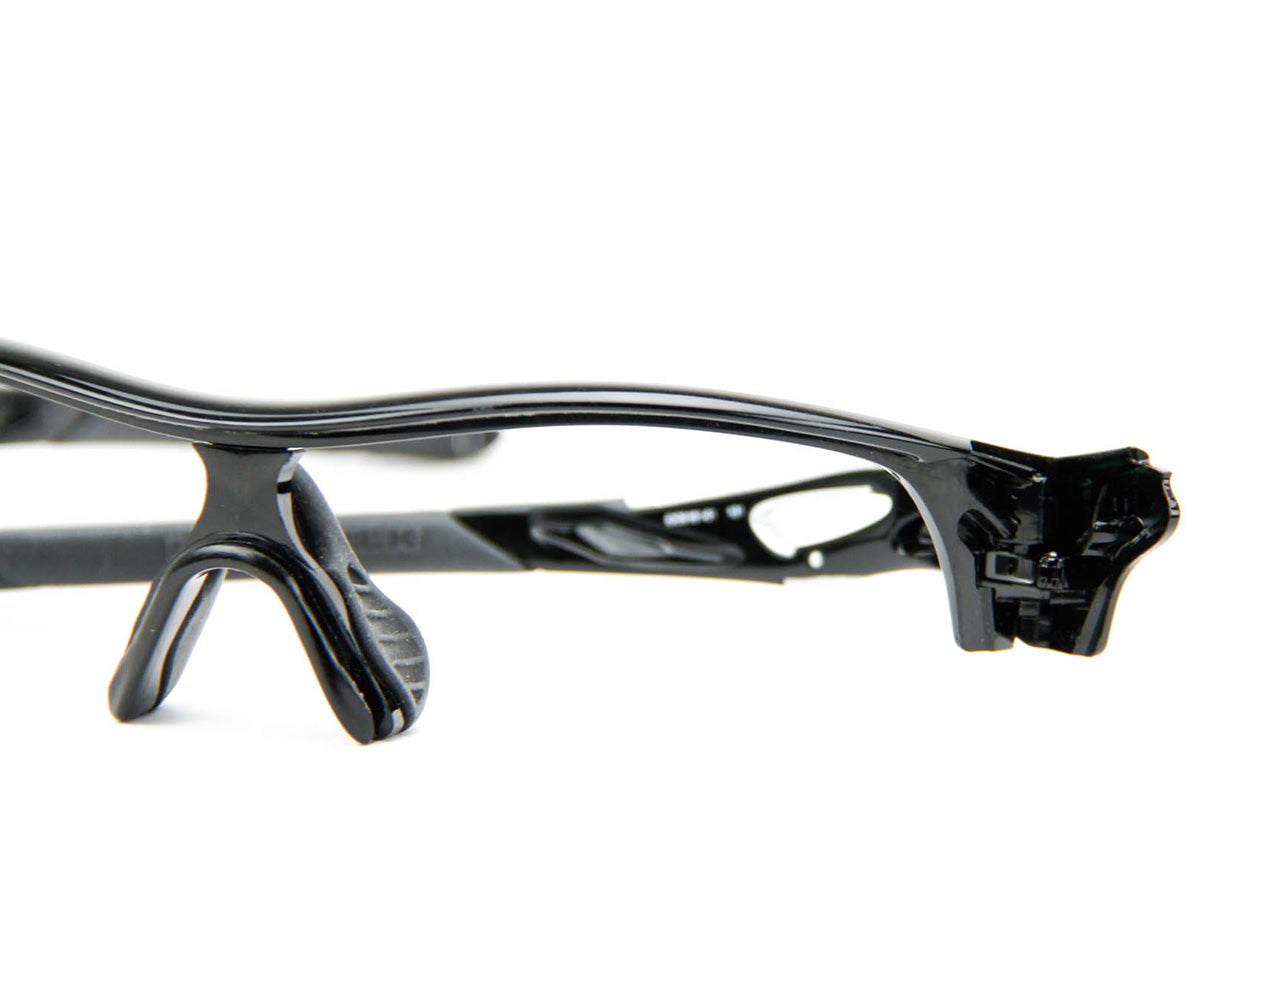 Oakley Radarlock sunglasses with no lenses in the open position